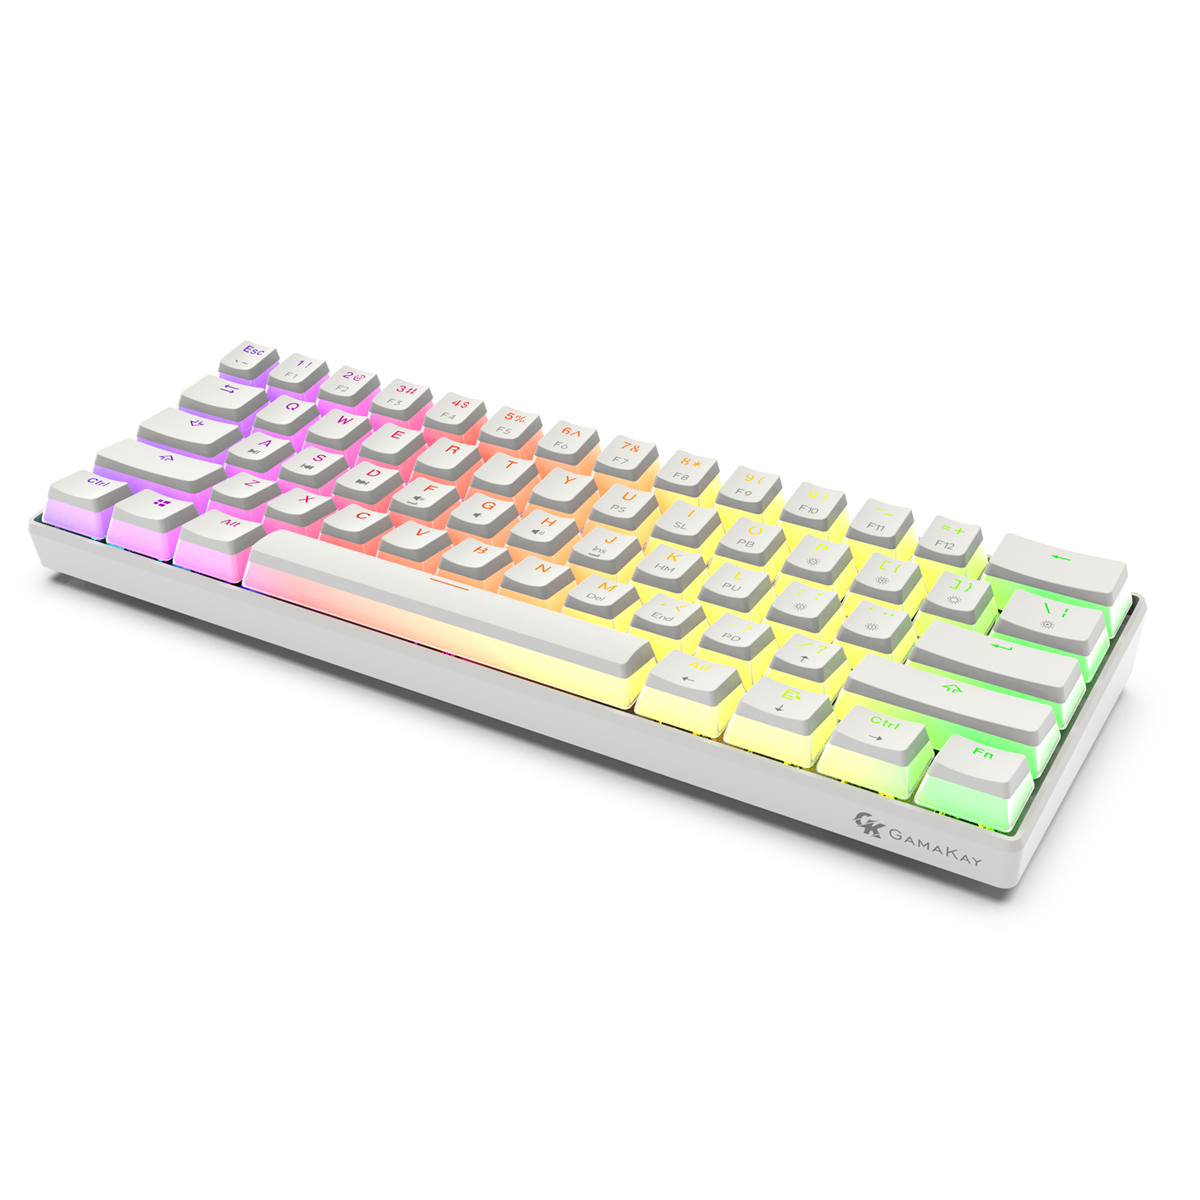 Gamakay MK61 Wired Mechanical Keyboard Gateron Optical Switch Pudding Keycaps RGB 61 Keys Hot Swappable Gaming Keyboard New Version 1